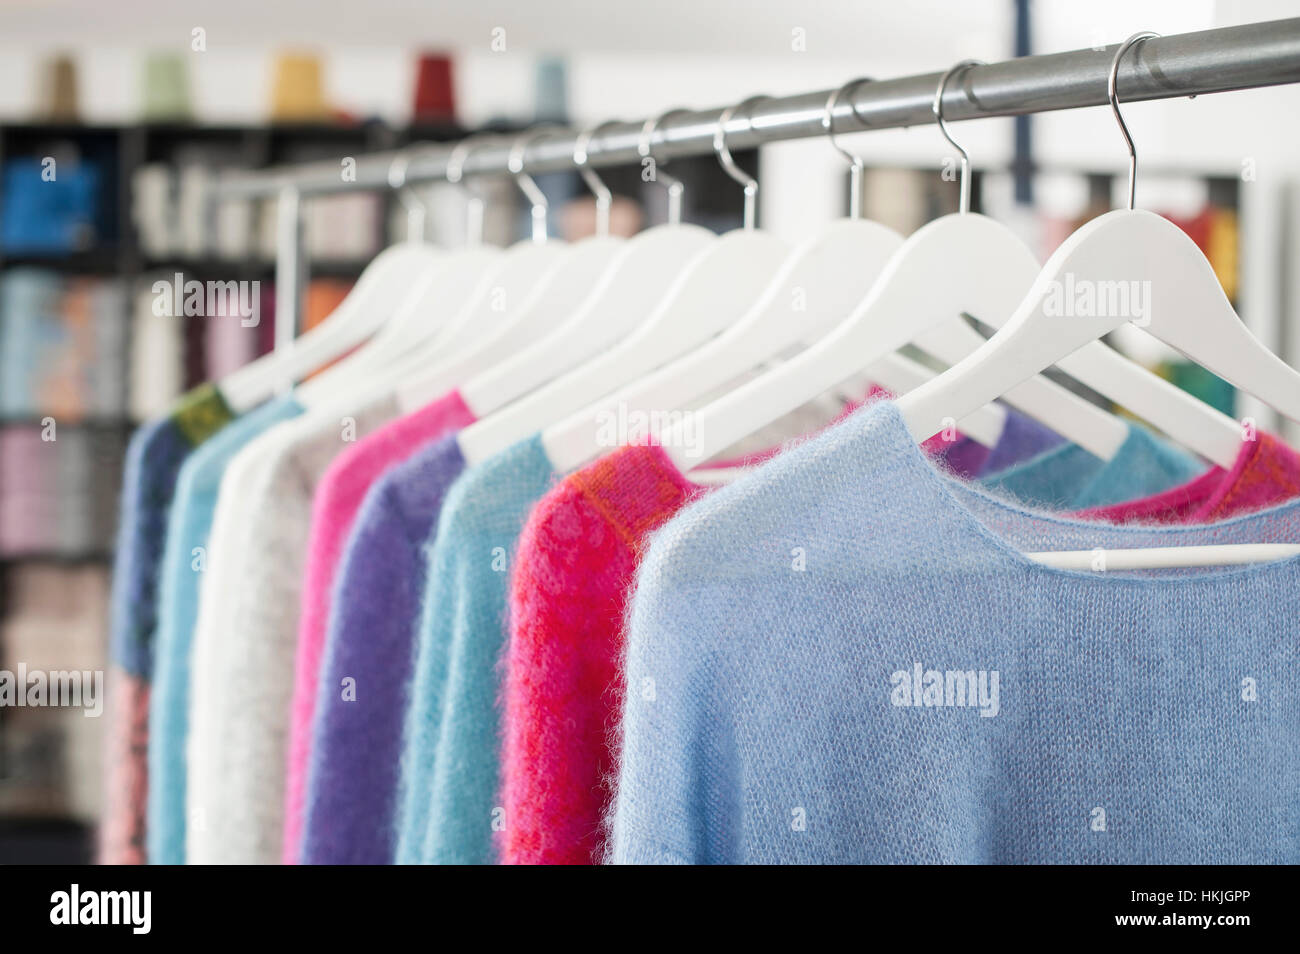 Handcrafted woollen clothes for sale at clothes shop, Bavaria, Germany Stock Photo